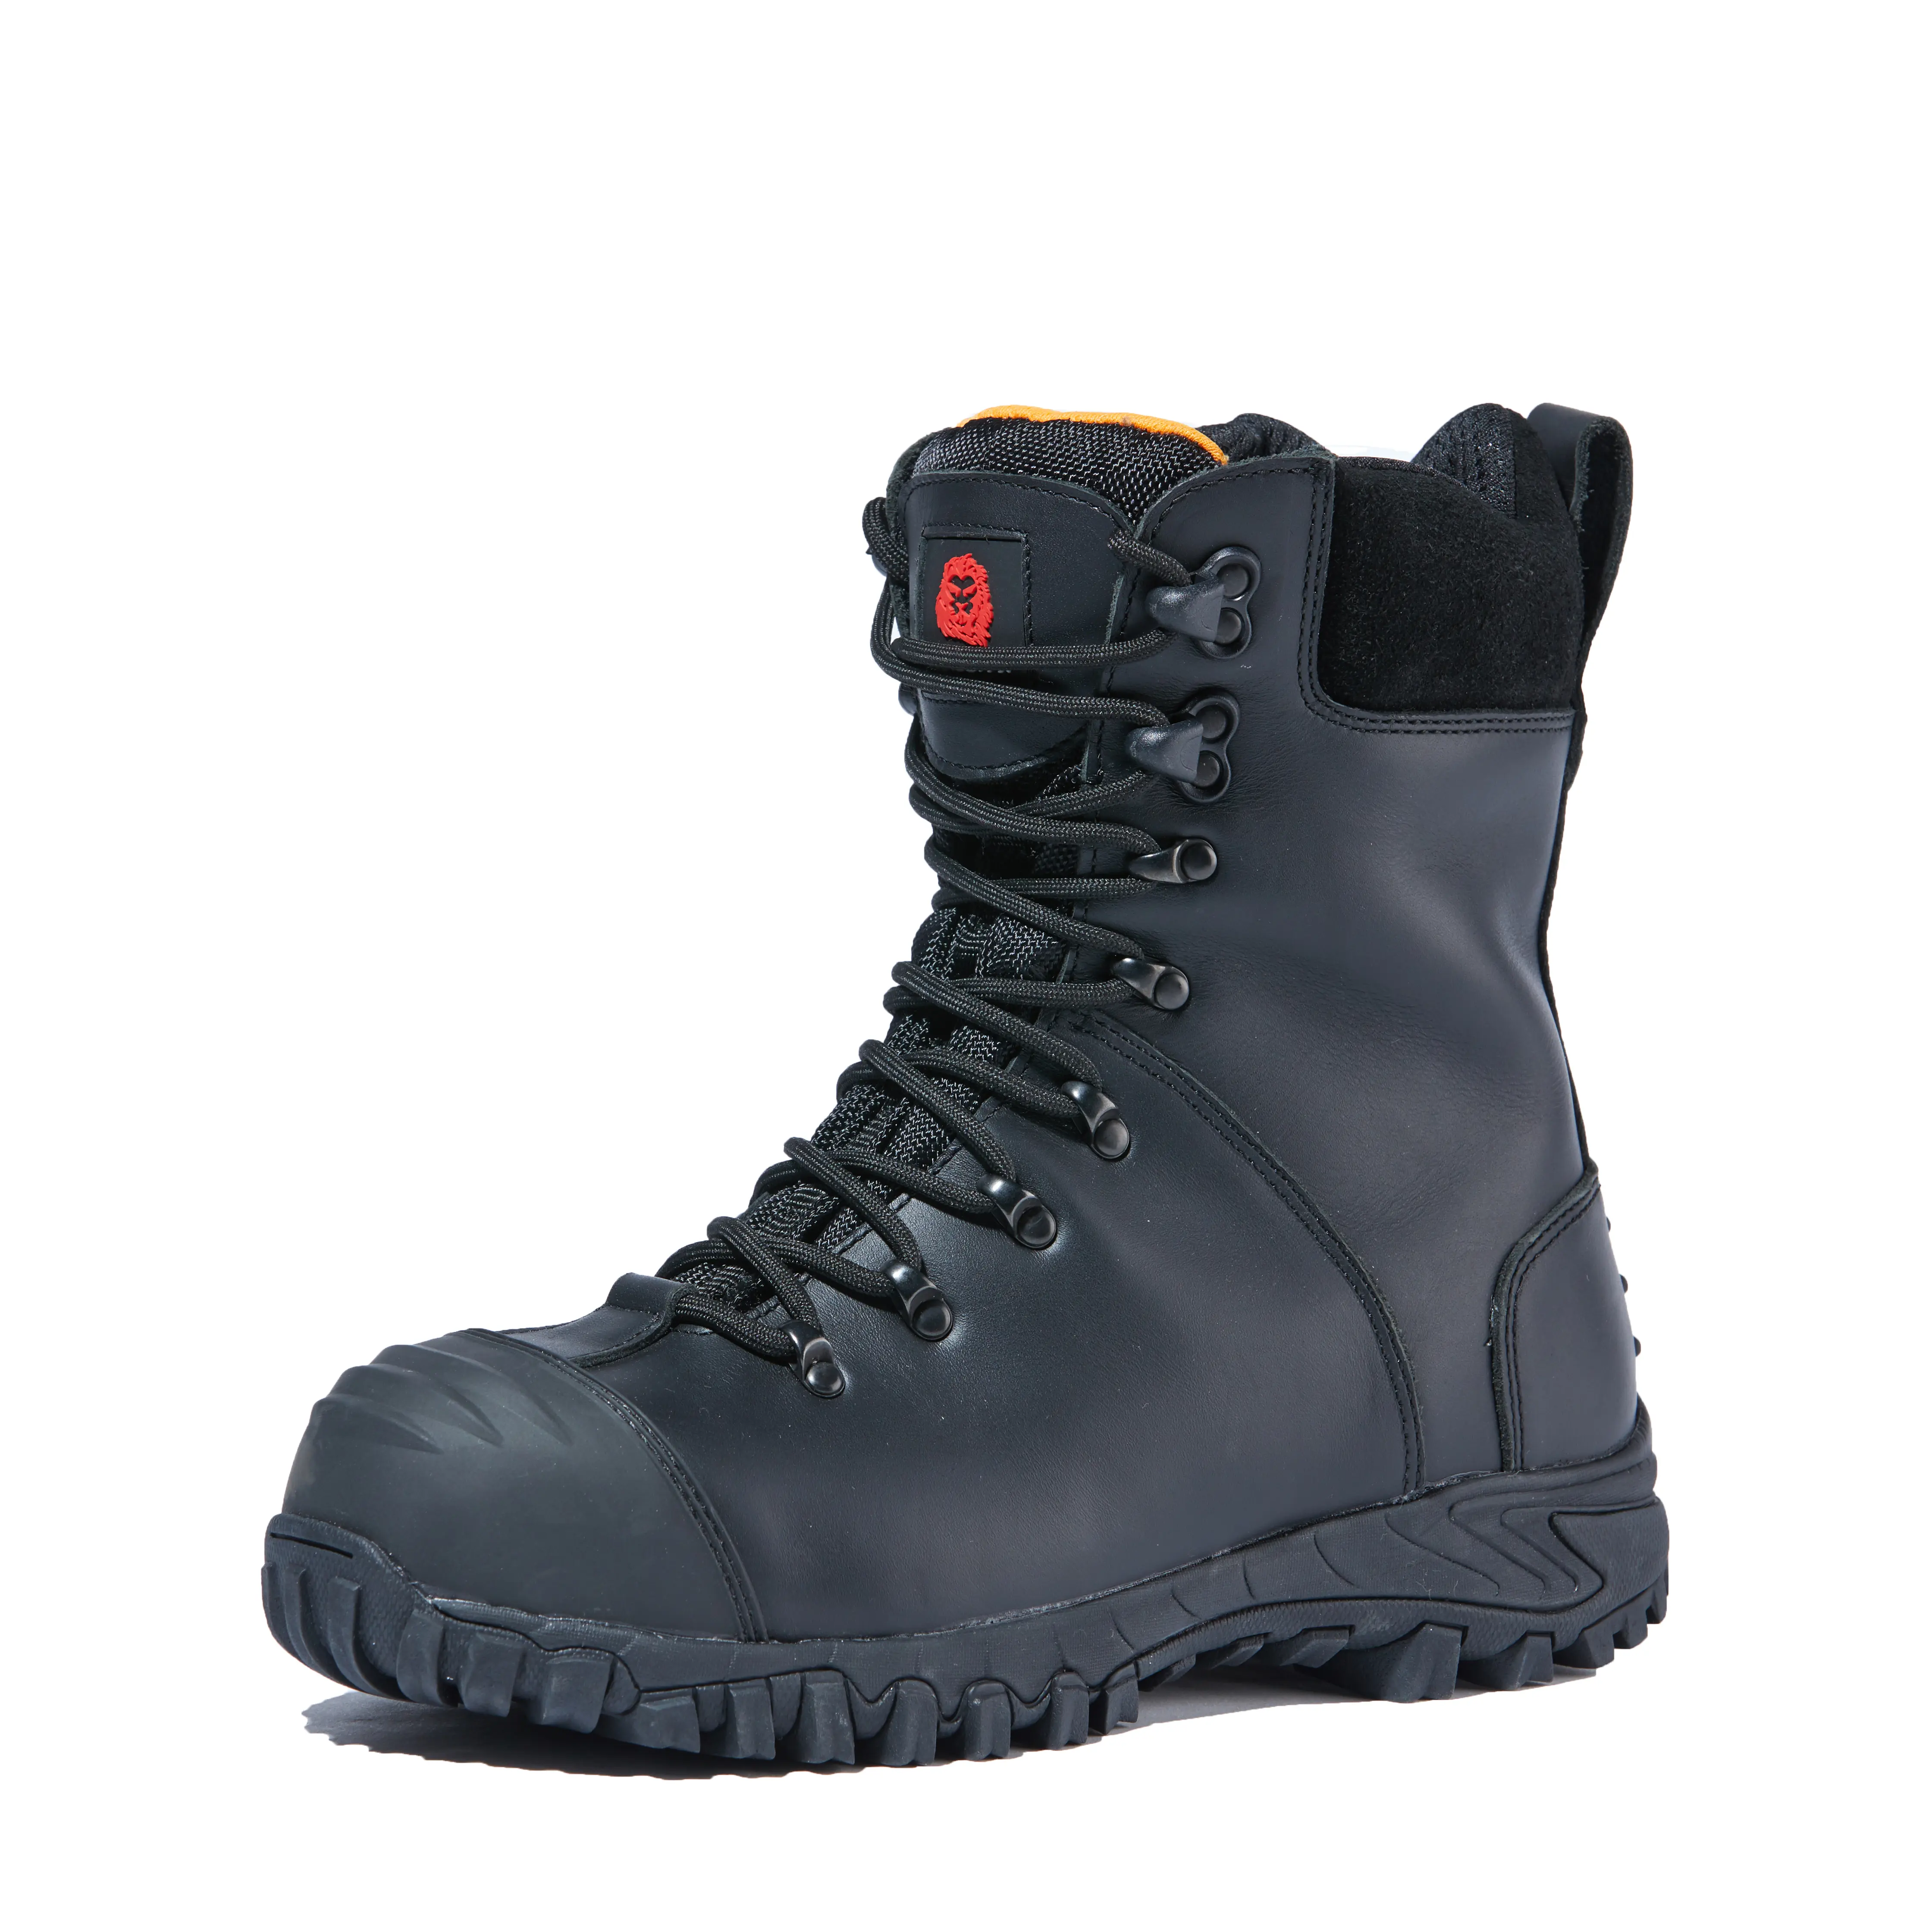 Shoe Safety Black Safety Shoes Cold Insulation Thinsulate Lining Work Footwear Safety Boots Winter Waterproof Safety Shoe For Men Buy Toefl